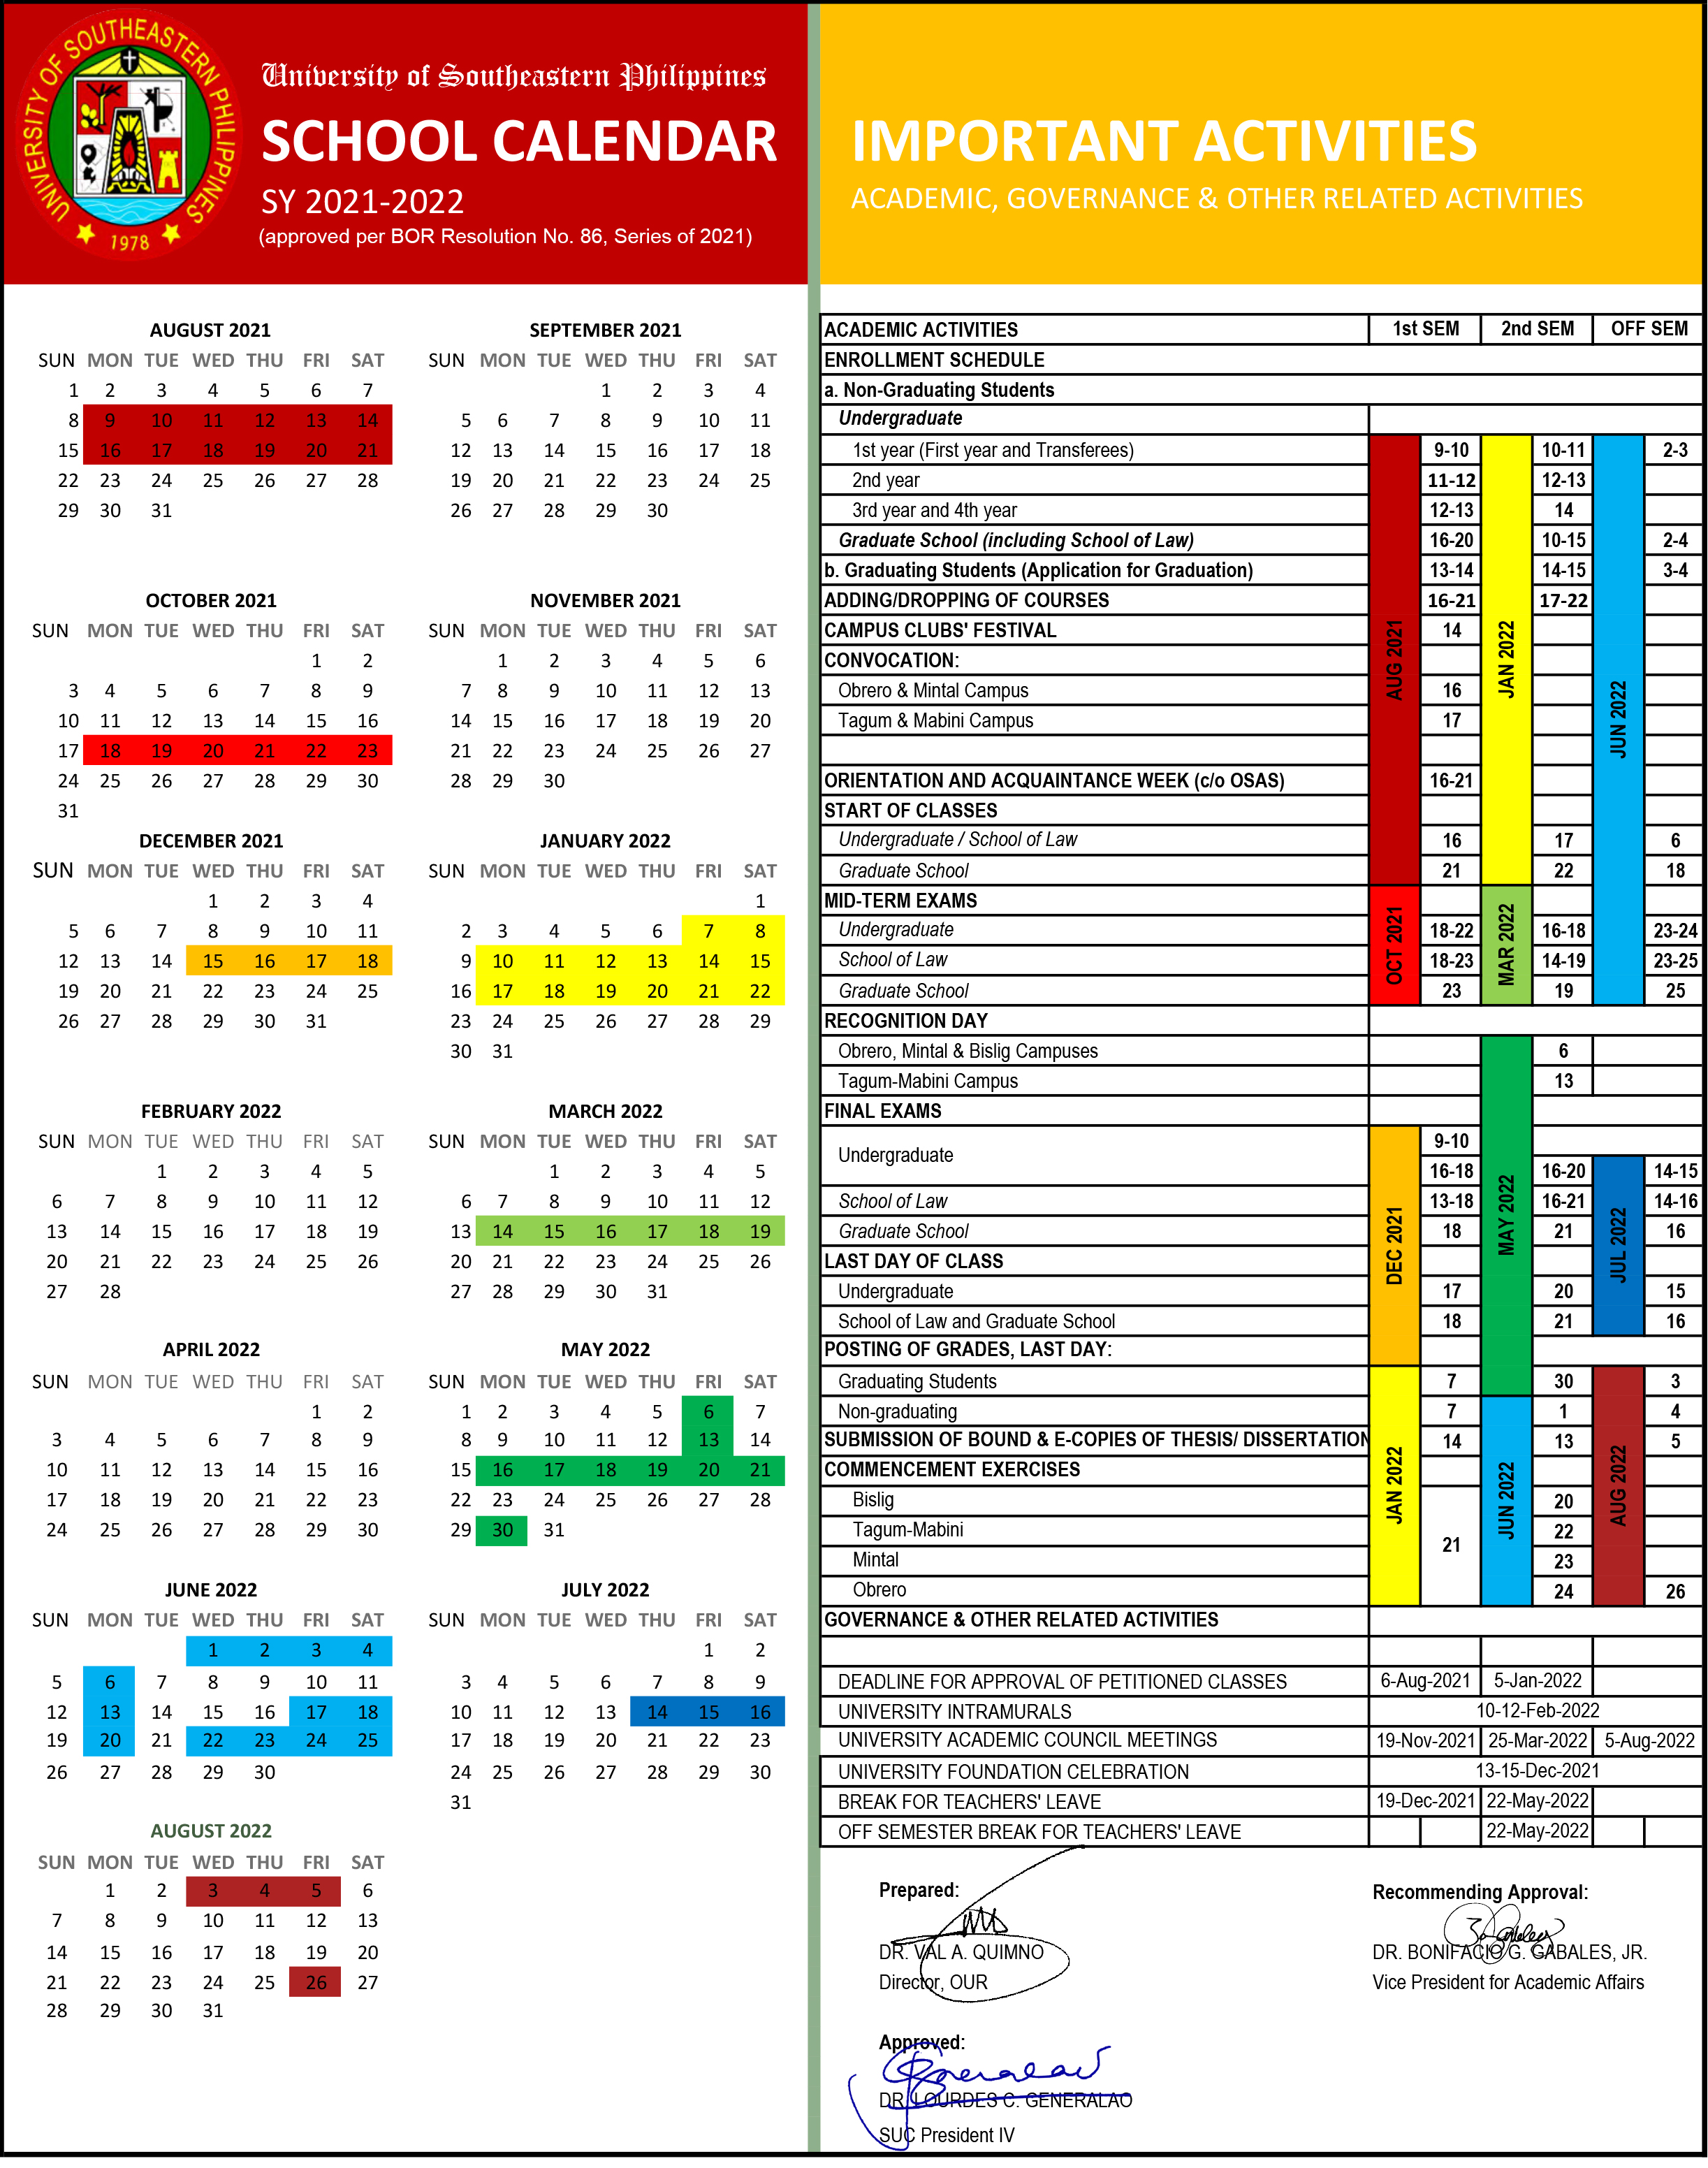 Deped School Calendar And Activities For Sy 2021 2022 Youtube www